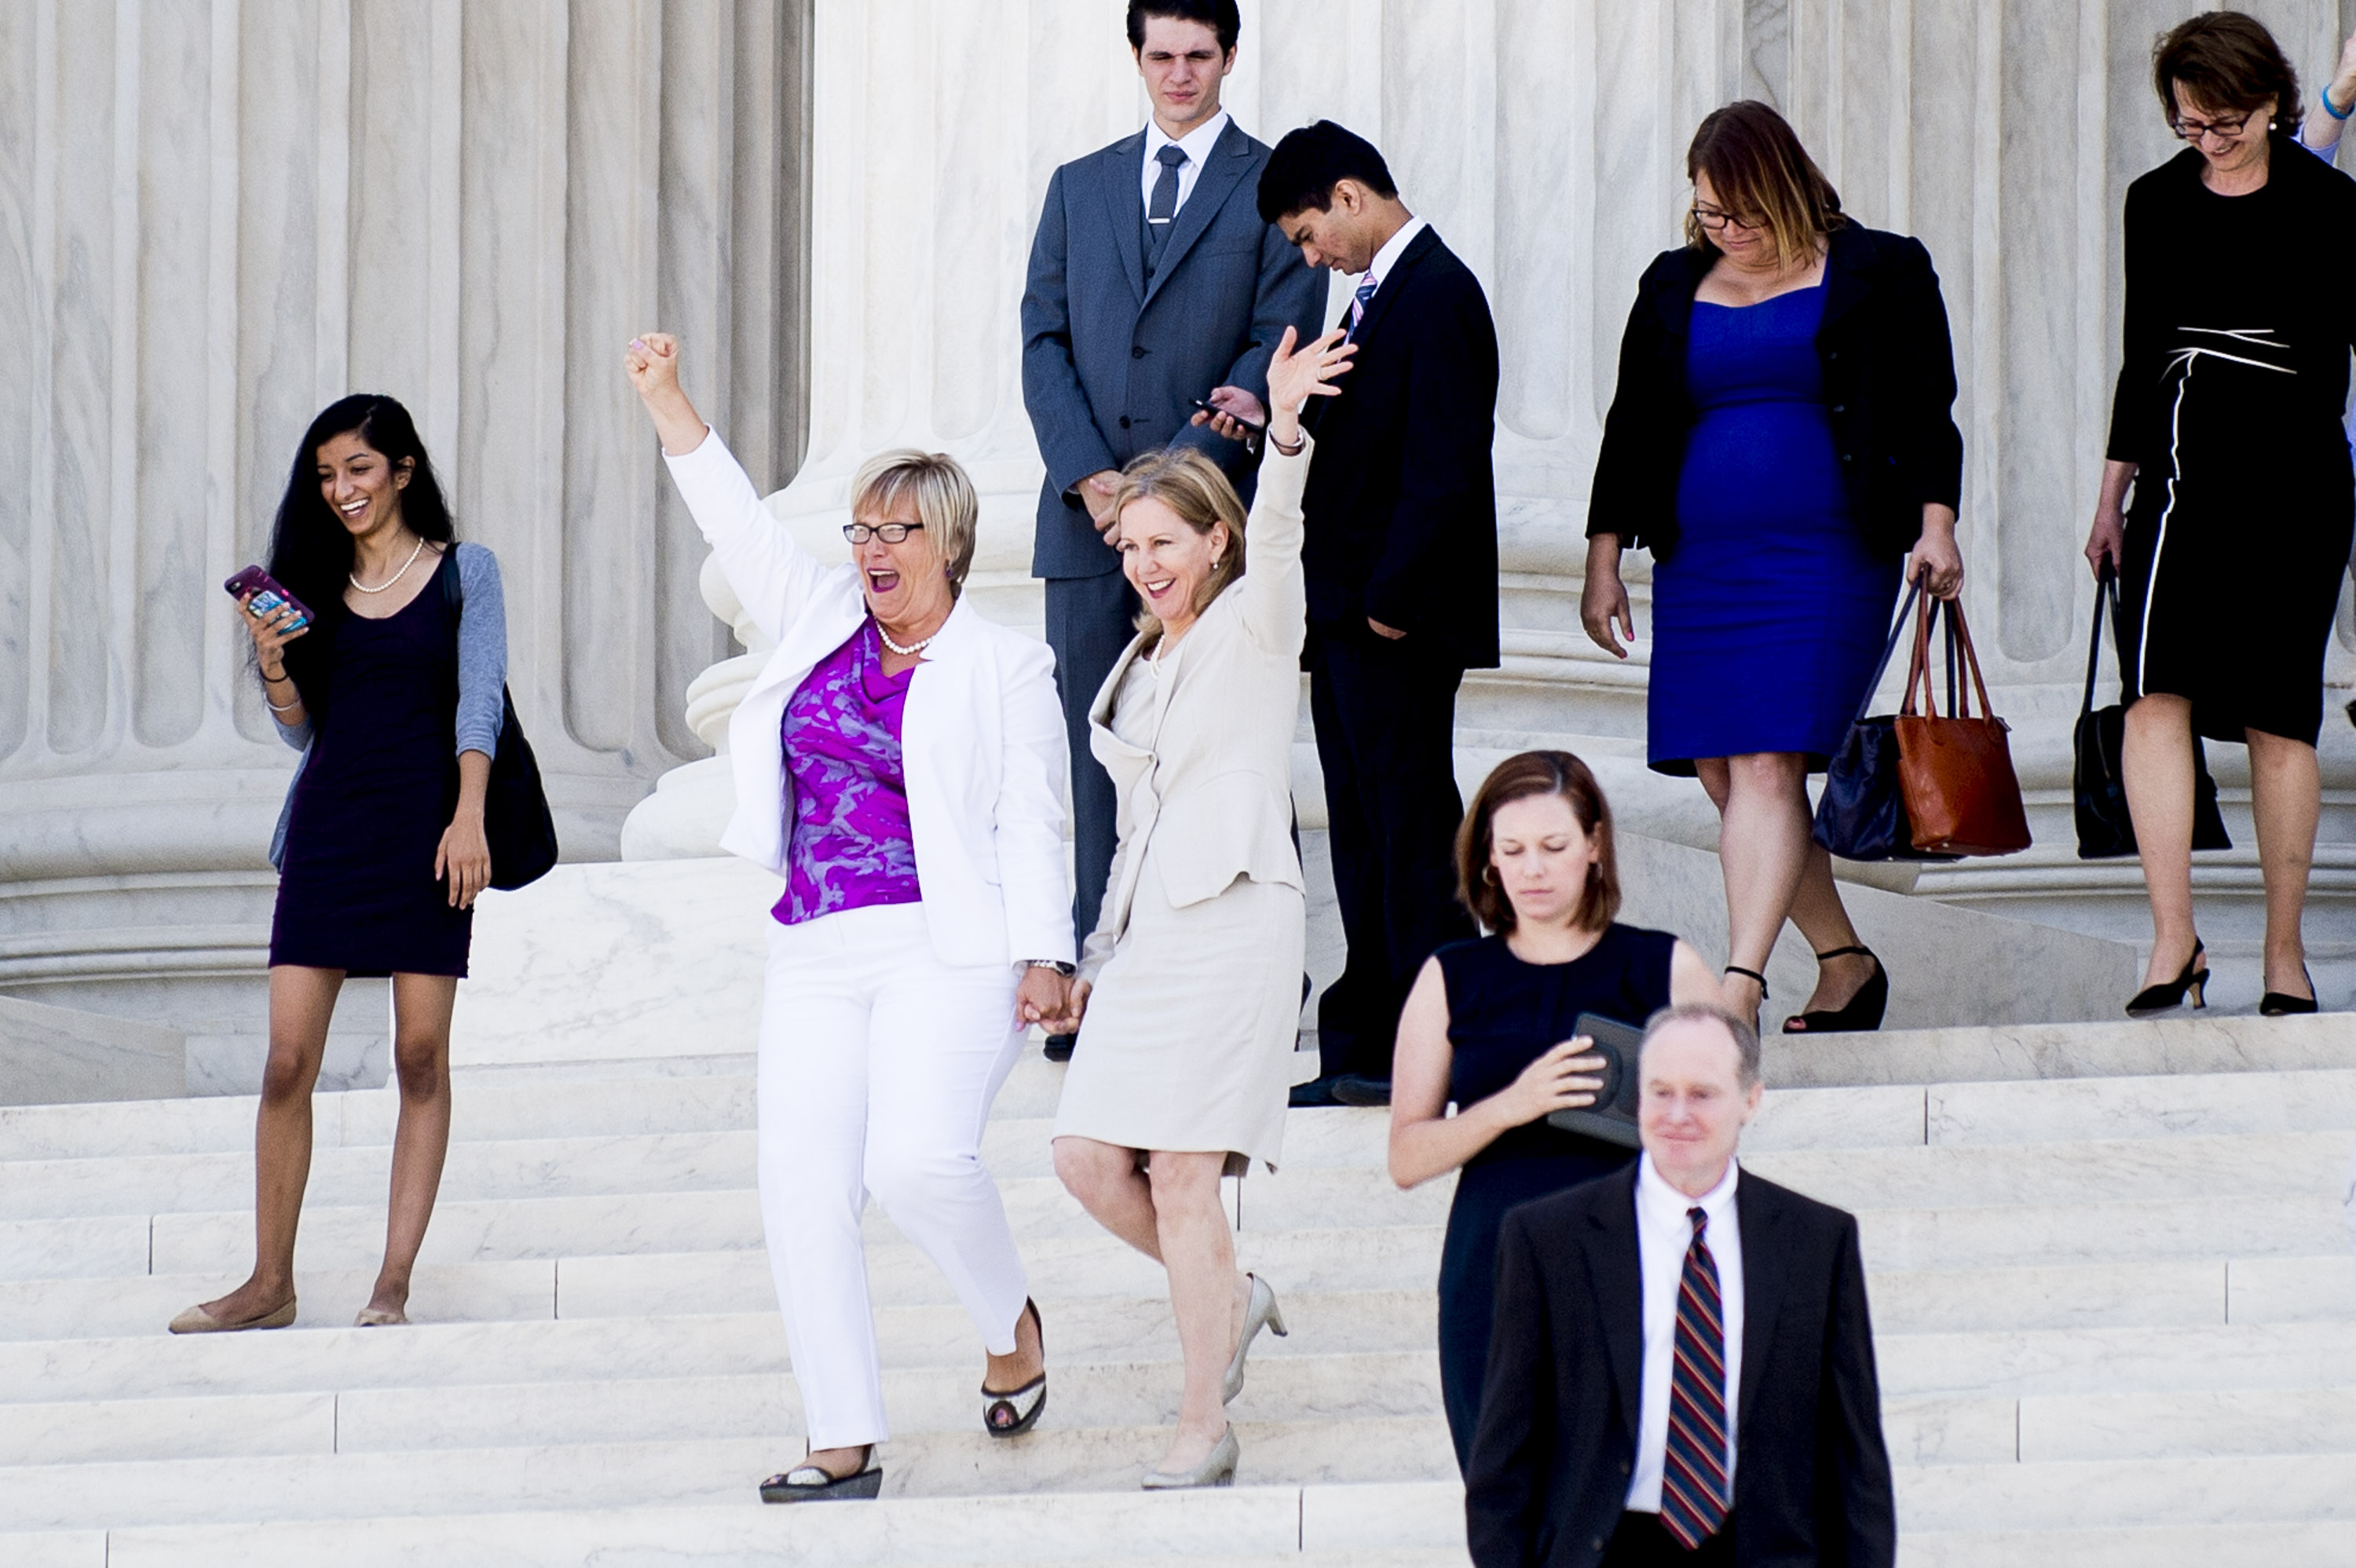 Texas abortion provider Amy Hagstrom-Miller and Nancy Northup, President of The Center for Reproductive Rights wave to supporters as they descend the steps of the United States Supreme Court in Washington, D.C., on June 27, 2016.